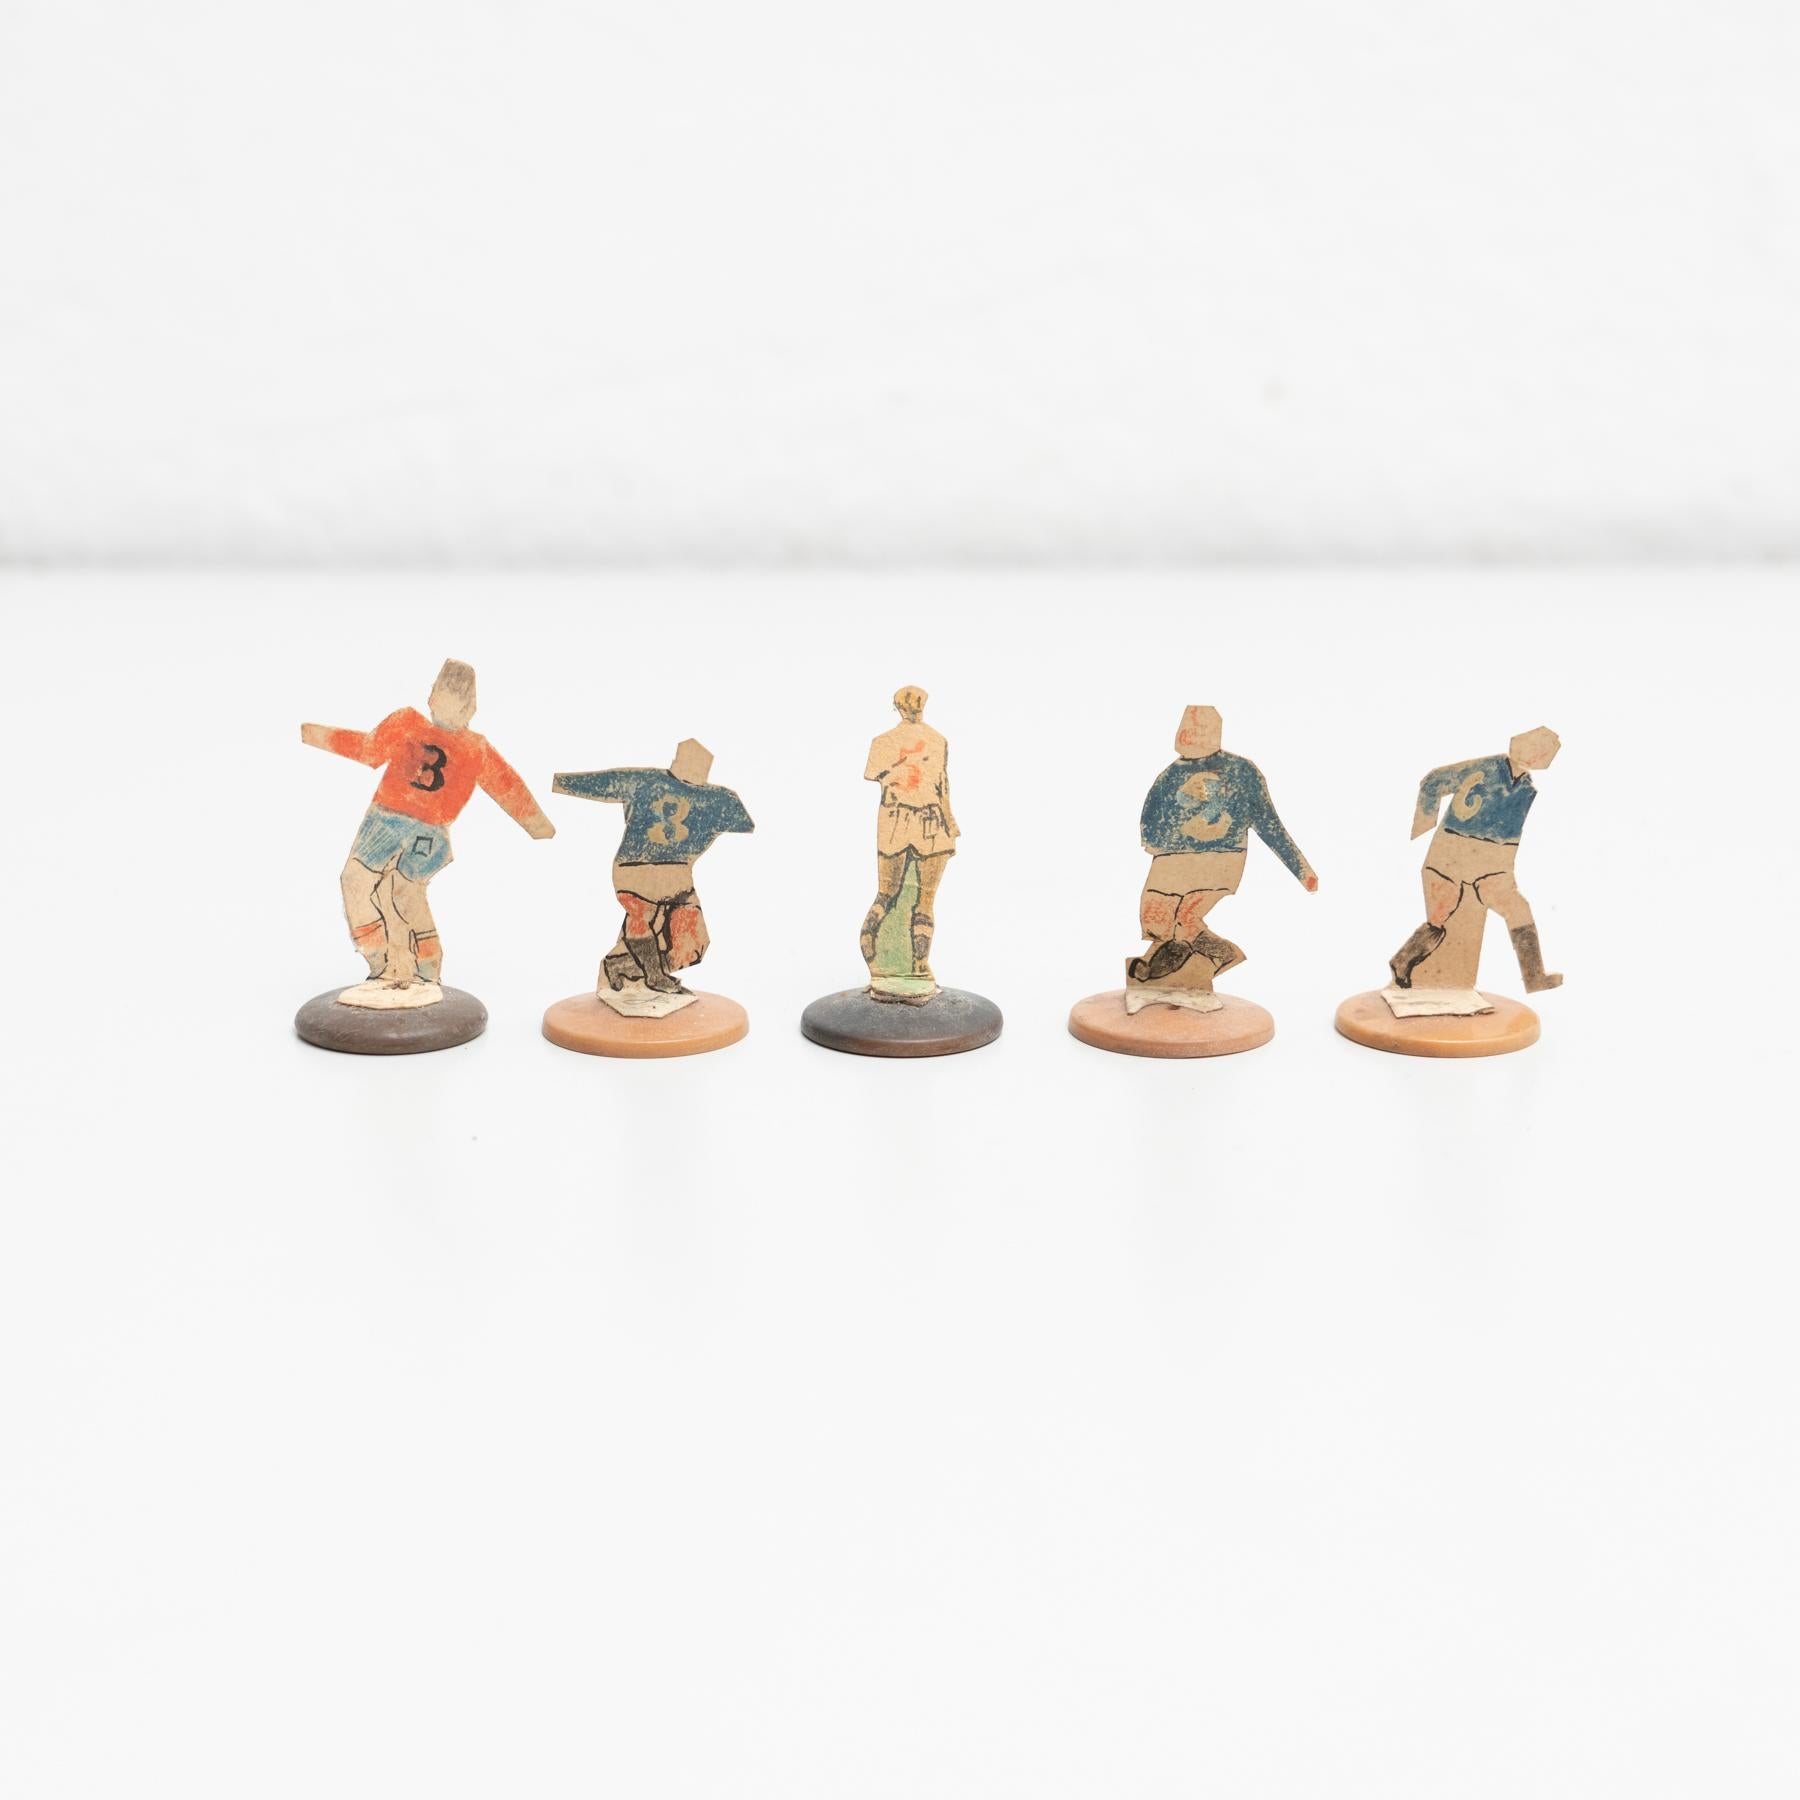 Set of 5 Traditional Antique Button Soccer Game Figures, circa 1950 For Sale 7